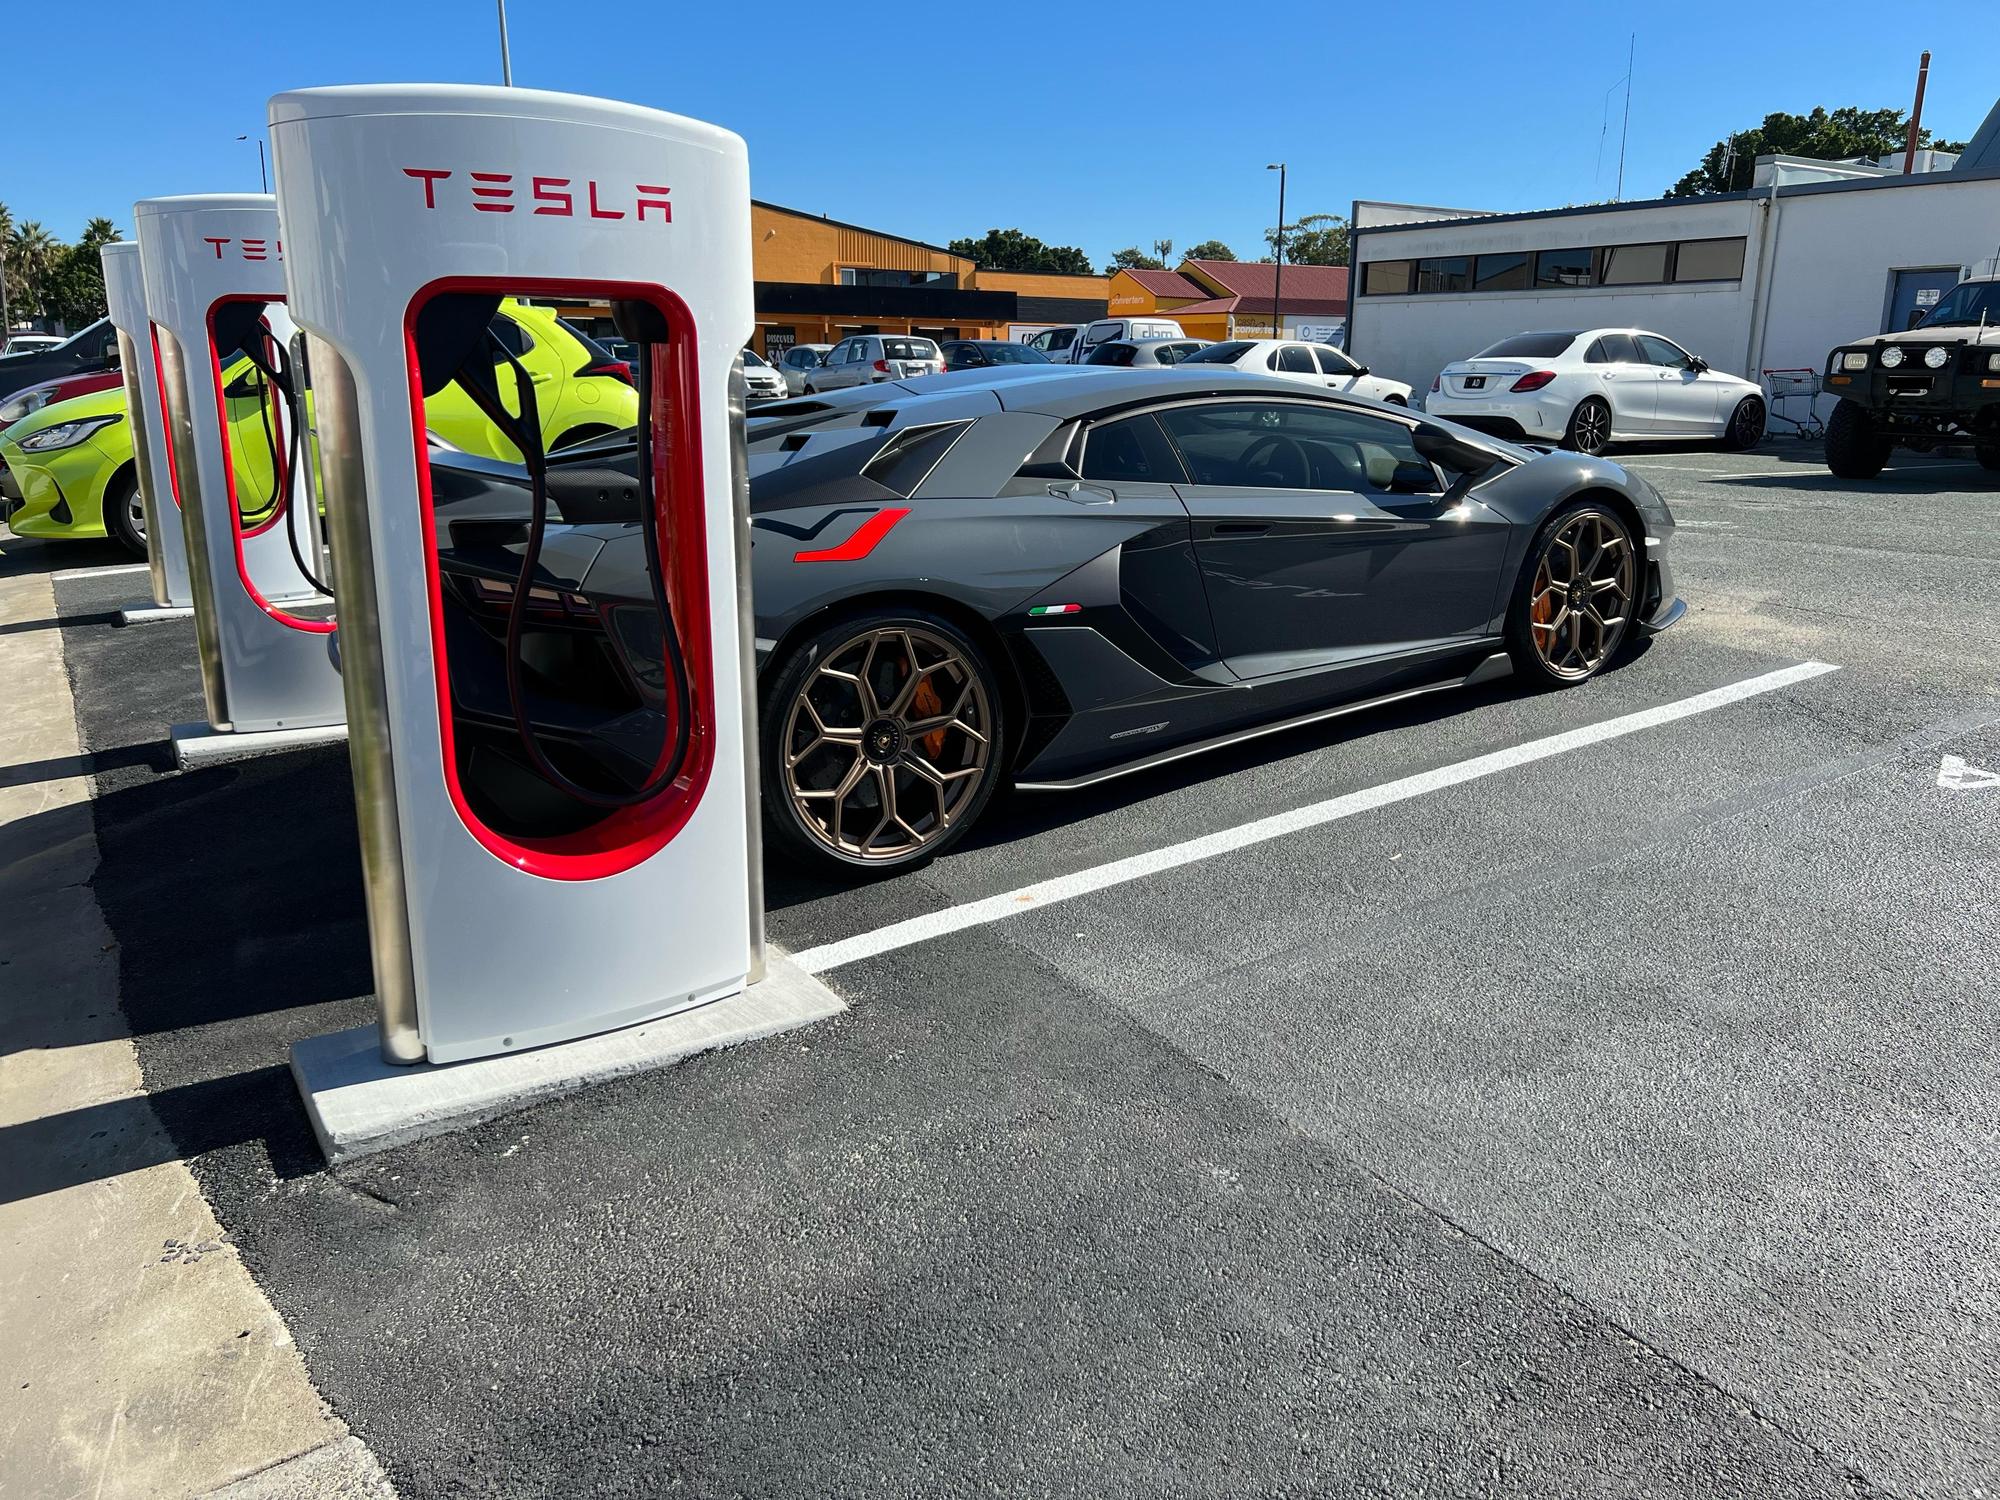 Tesla Superchargers are nonetheless being ICE’d in 2023